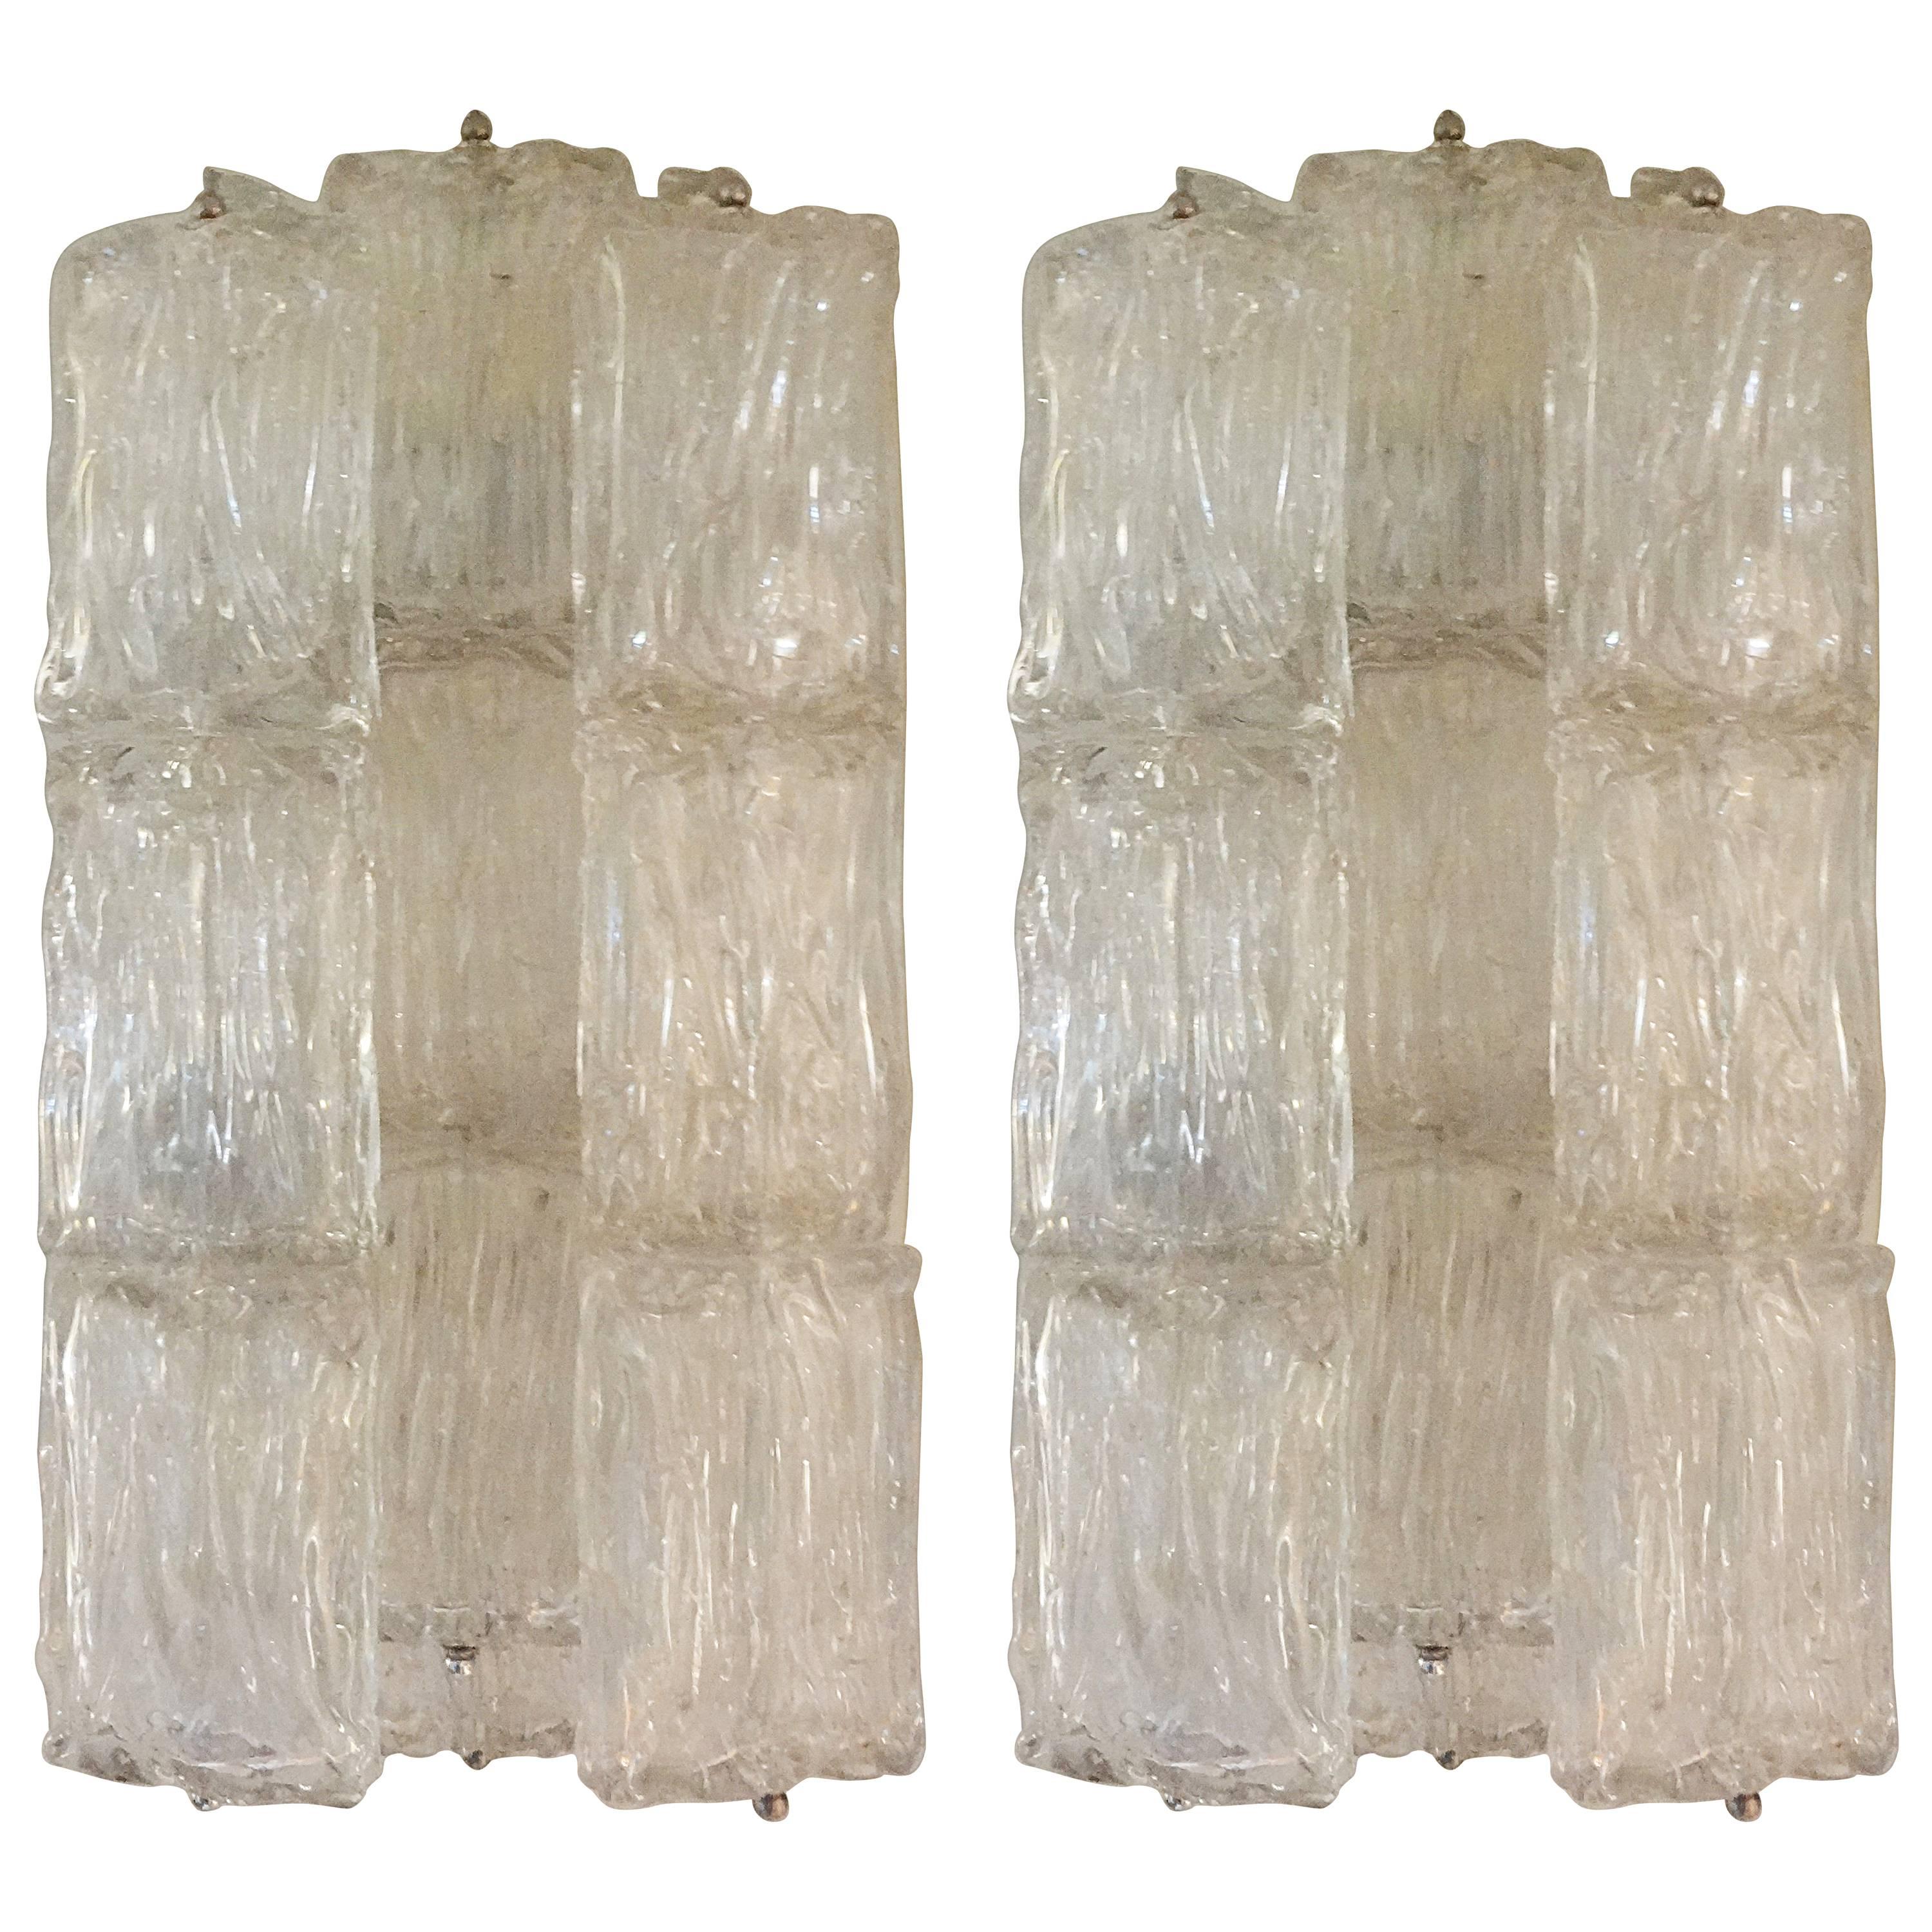 Pair of Murano Glass Sconces, Made in Venice